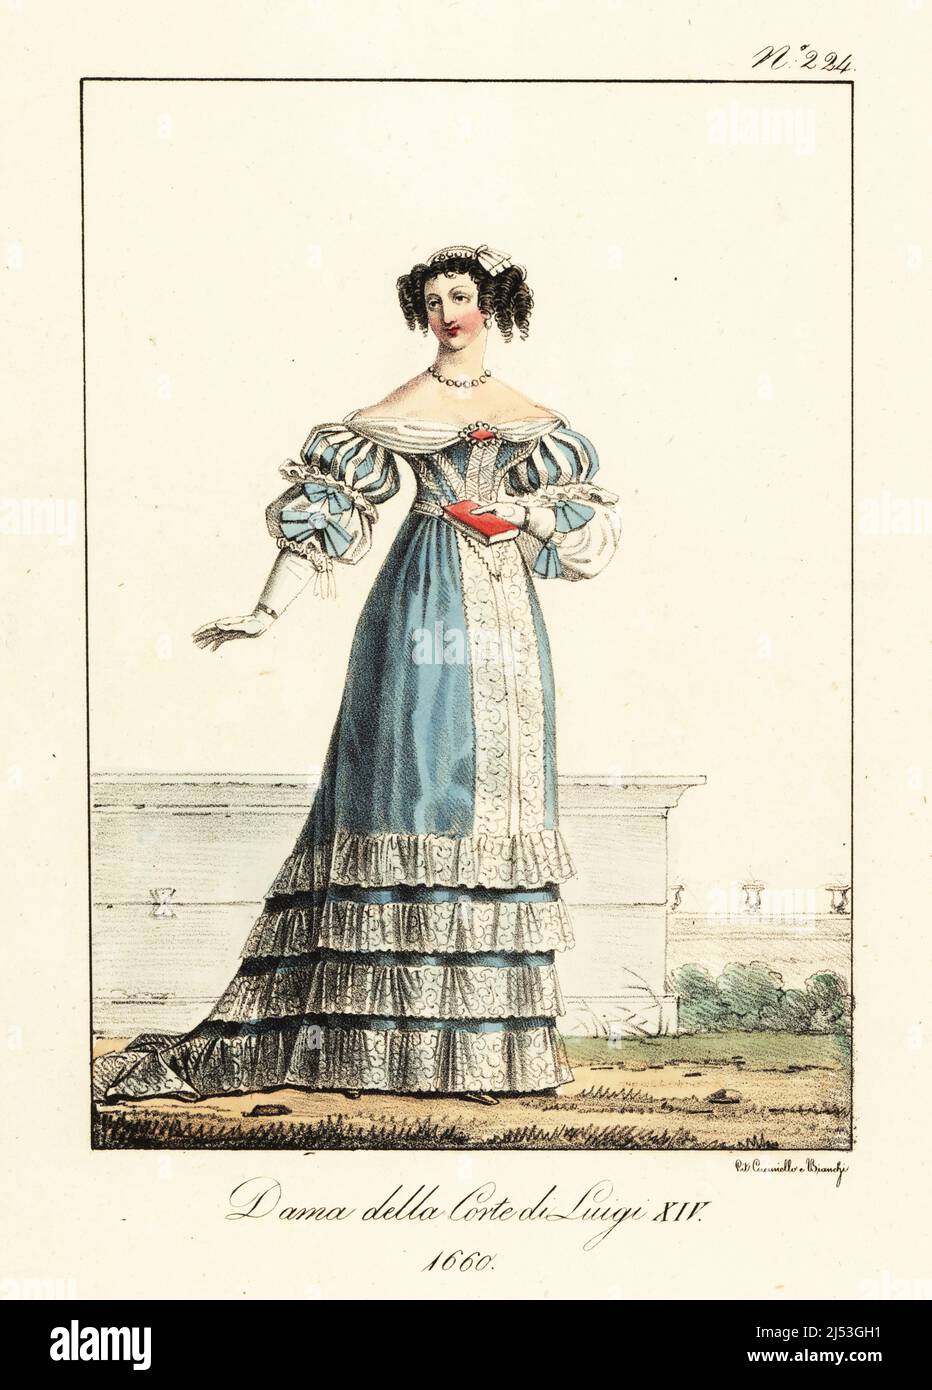 Costume of a lady at the court of King Louis XIV of France, 1660. In off-the-shoulder gown, lace tucker, slashed puff sleeves, lace-trimmed bodice and skirts with lace frills. Dame de la Cour de Louis XIV. Handcoloured lithograph by Lorenzo Bianchi and Domenico Cuciniello after Hippolyte Lecomte from Costumi civili e militari della monarchia francese dal 1200 al 1820, Naples, 1825. Italian edition of Lecomte’s Civilian and military costumes of the French monarchy from 1200 to 1820. Stock Photo